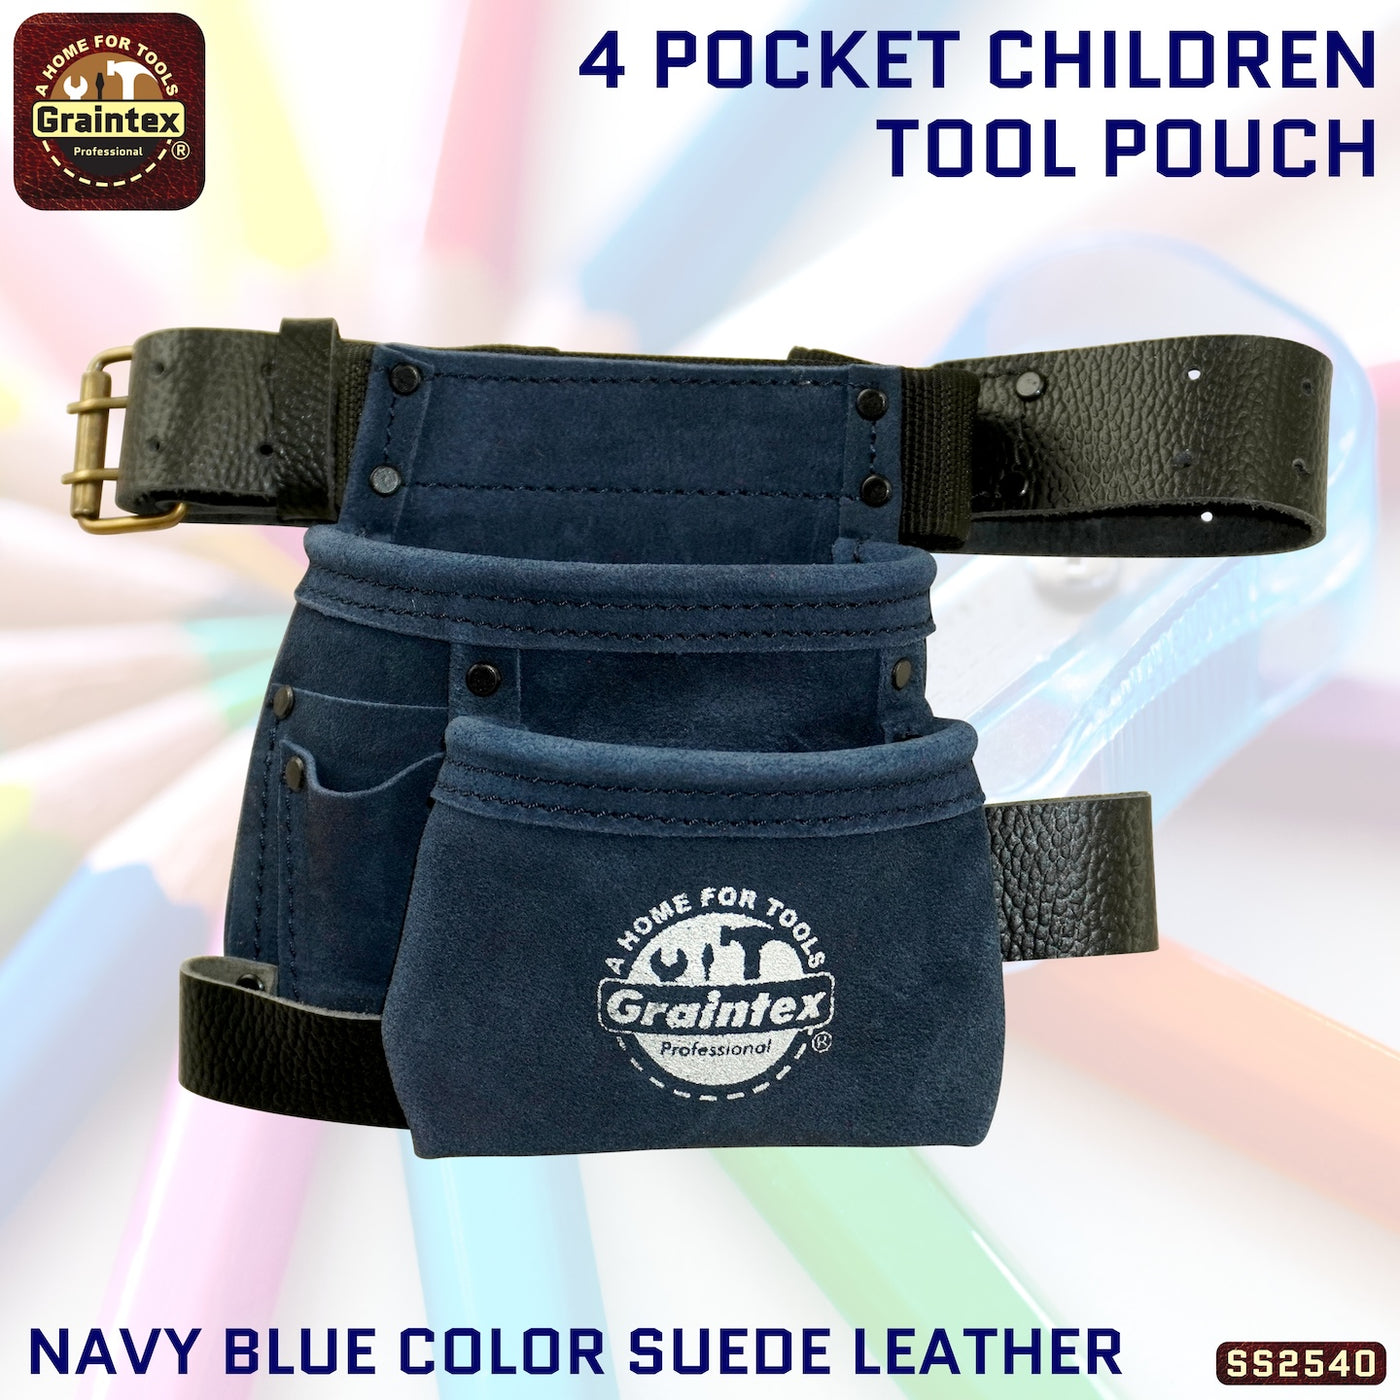 SS2540 :: 4 Pocket Children Tool Pouch Navy Blue Color Suede Leather